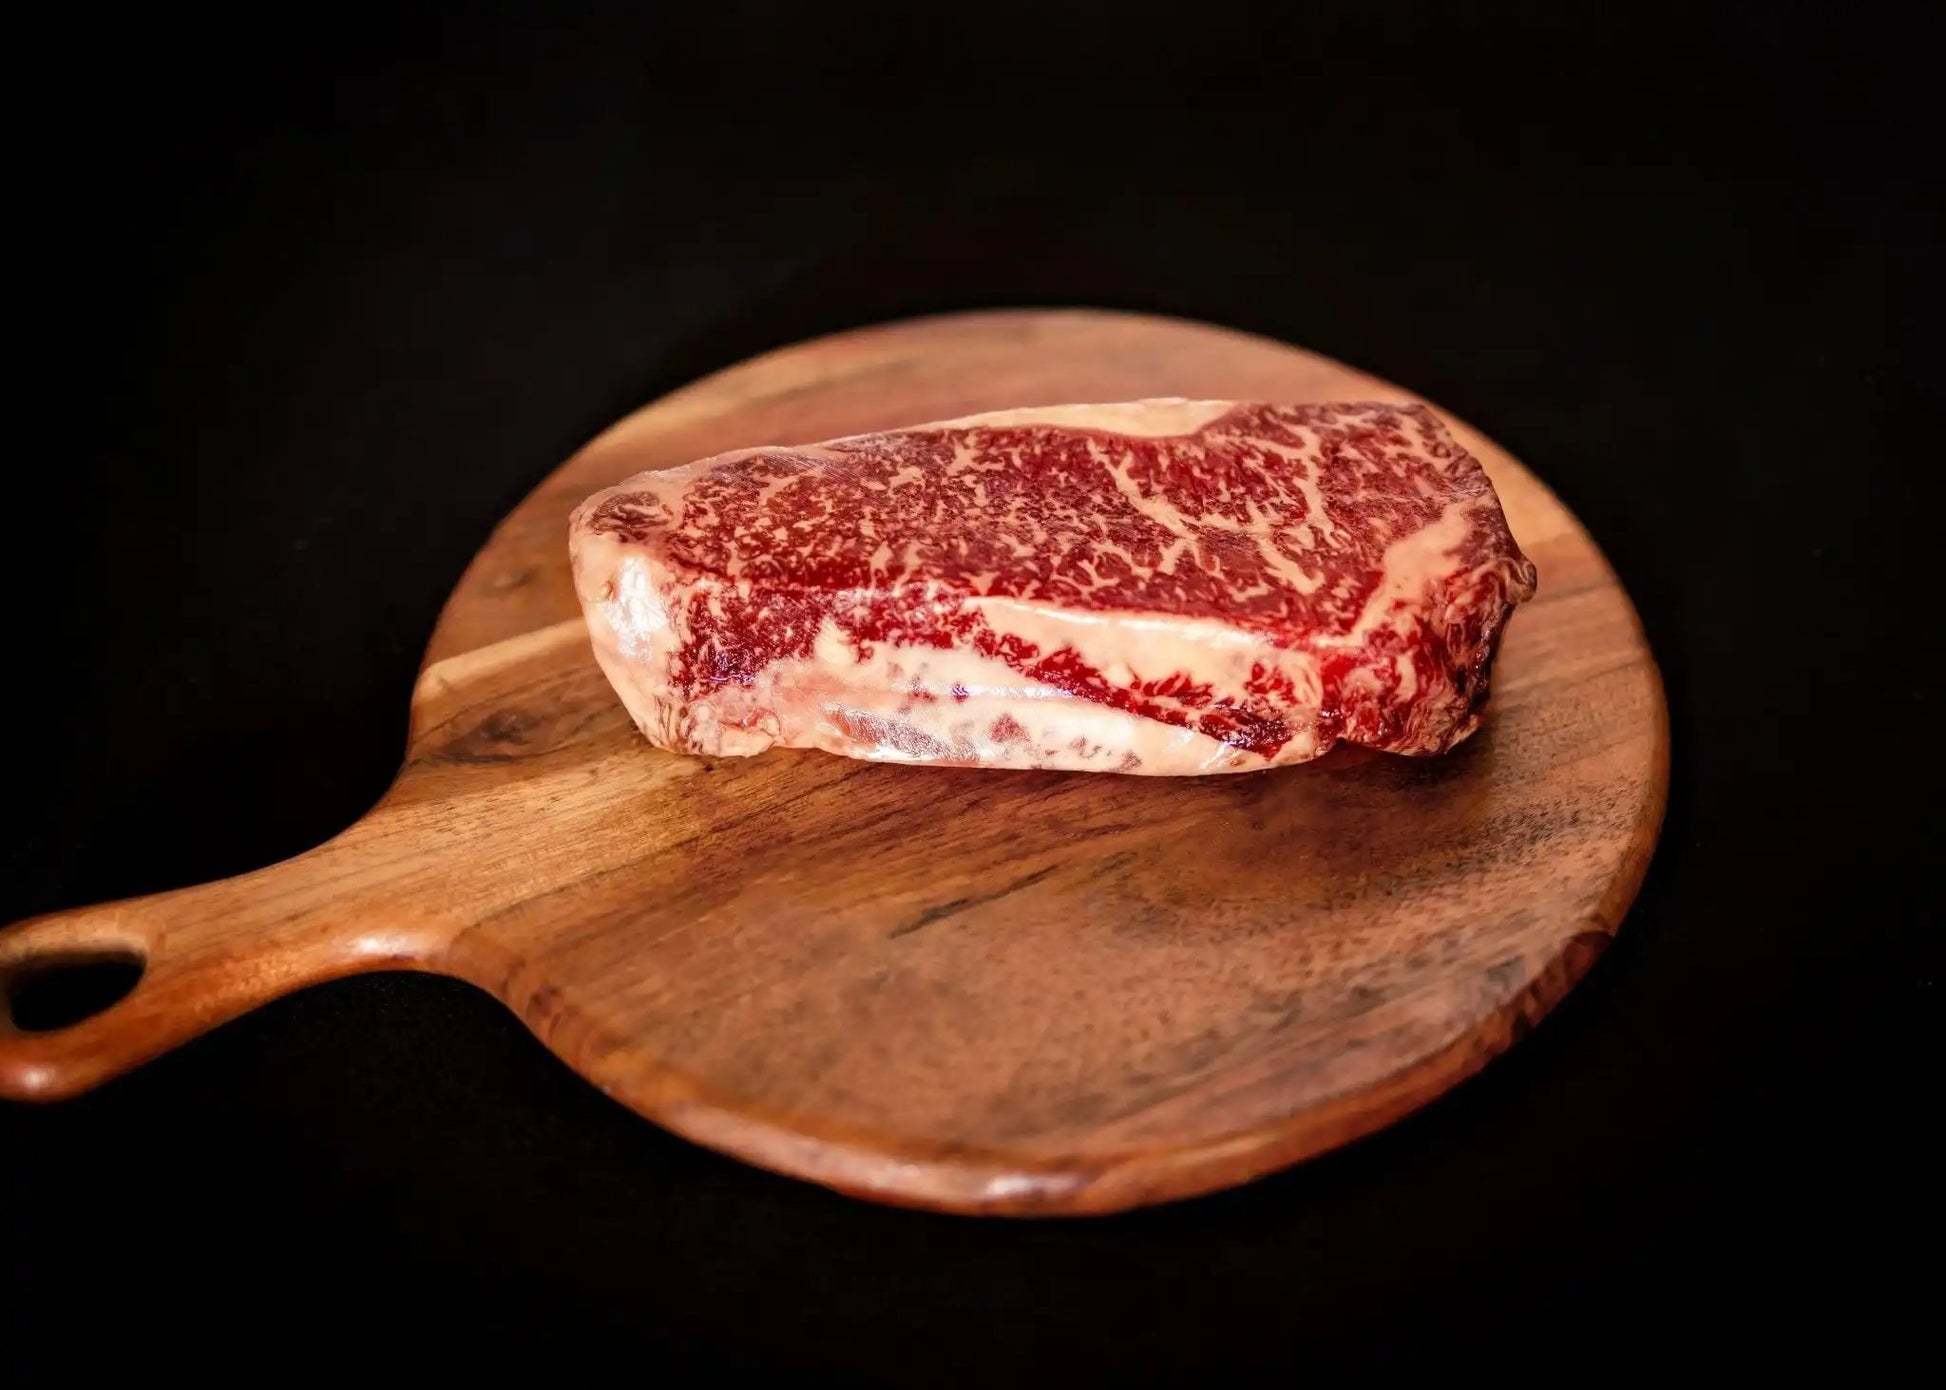 100% All-Natural Grass-Fed Pasture-Raised Wagyu New York Strip - The Hufeisen-Ranch (WYO Wagyu)